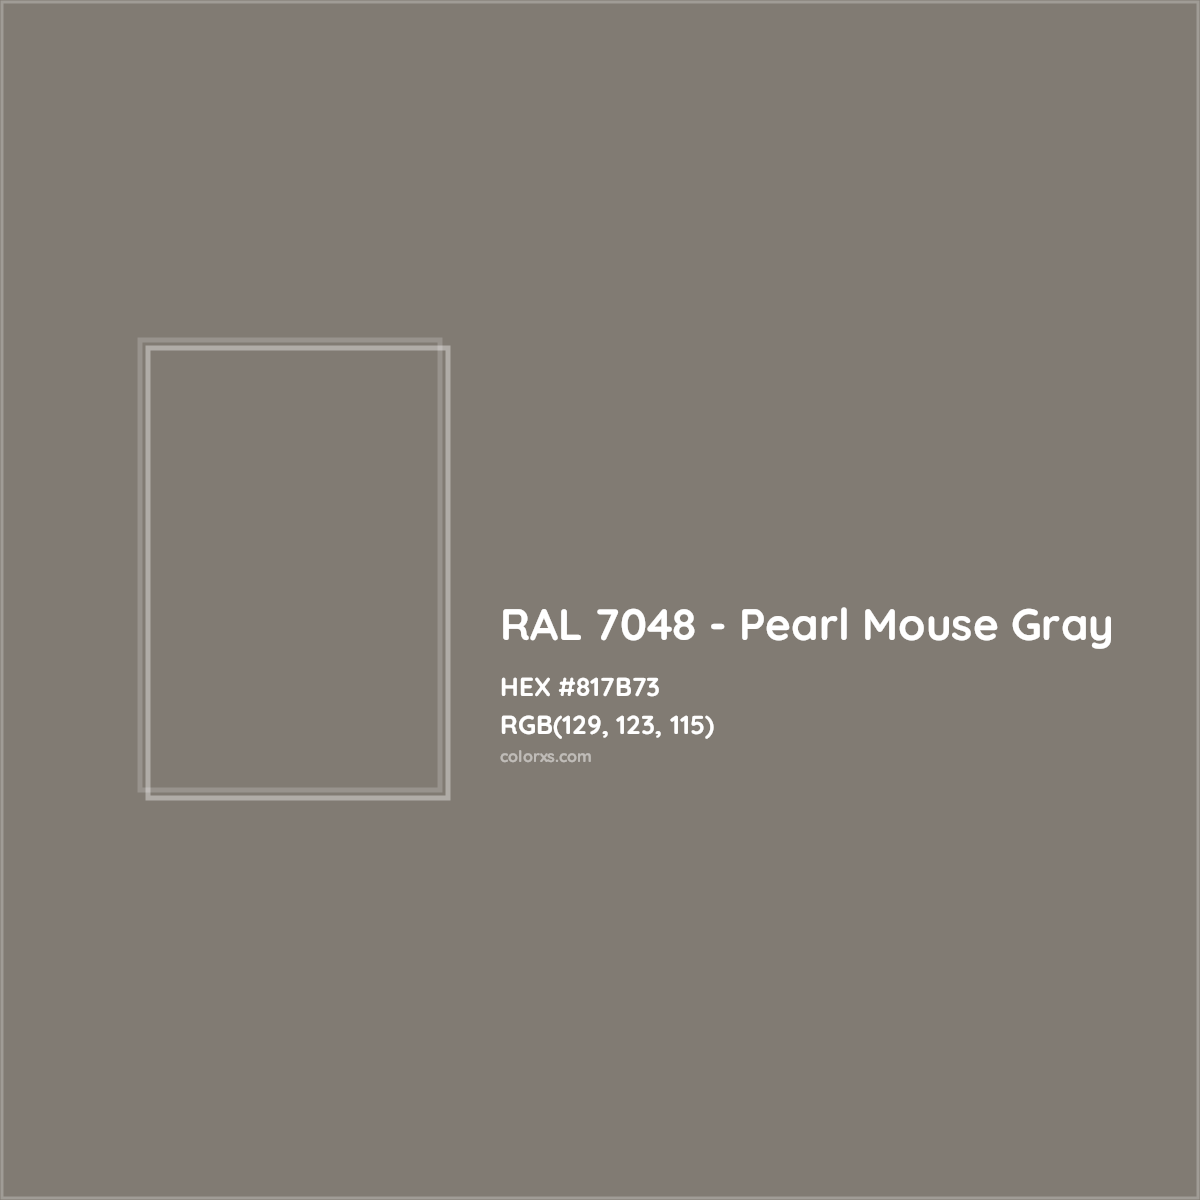 HEX #817B73 RAL 7048 - Pearl Mouse Gray CMS RAL Classic - Color Code